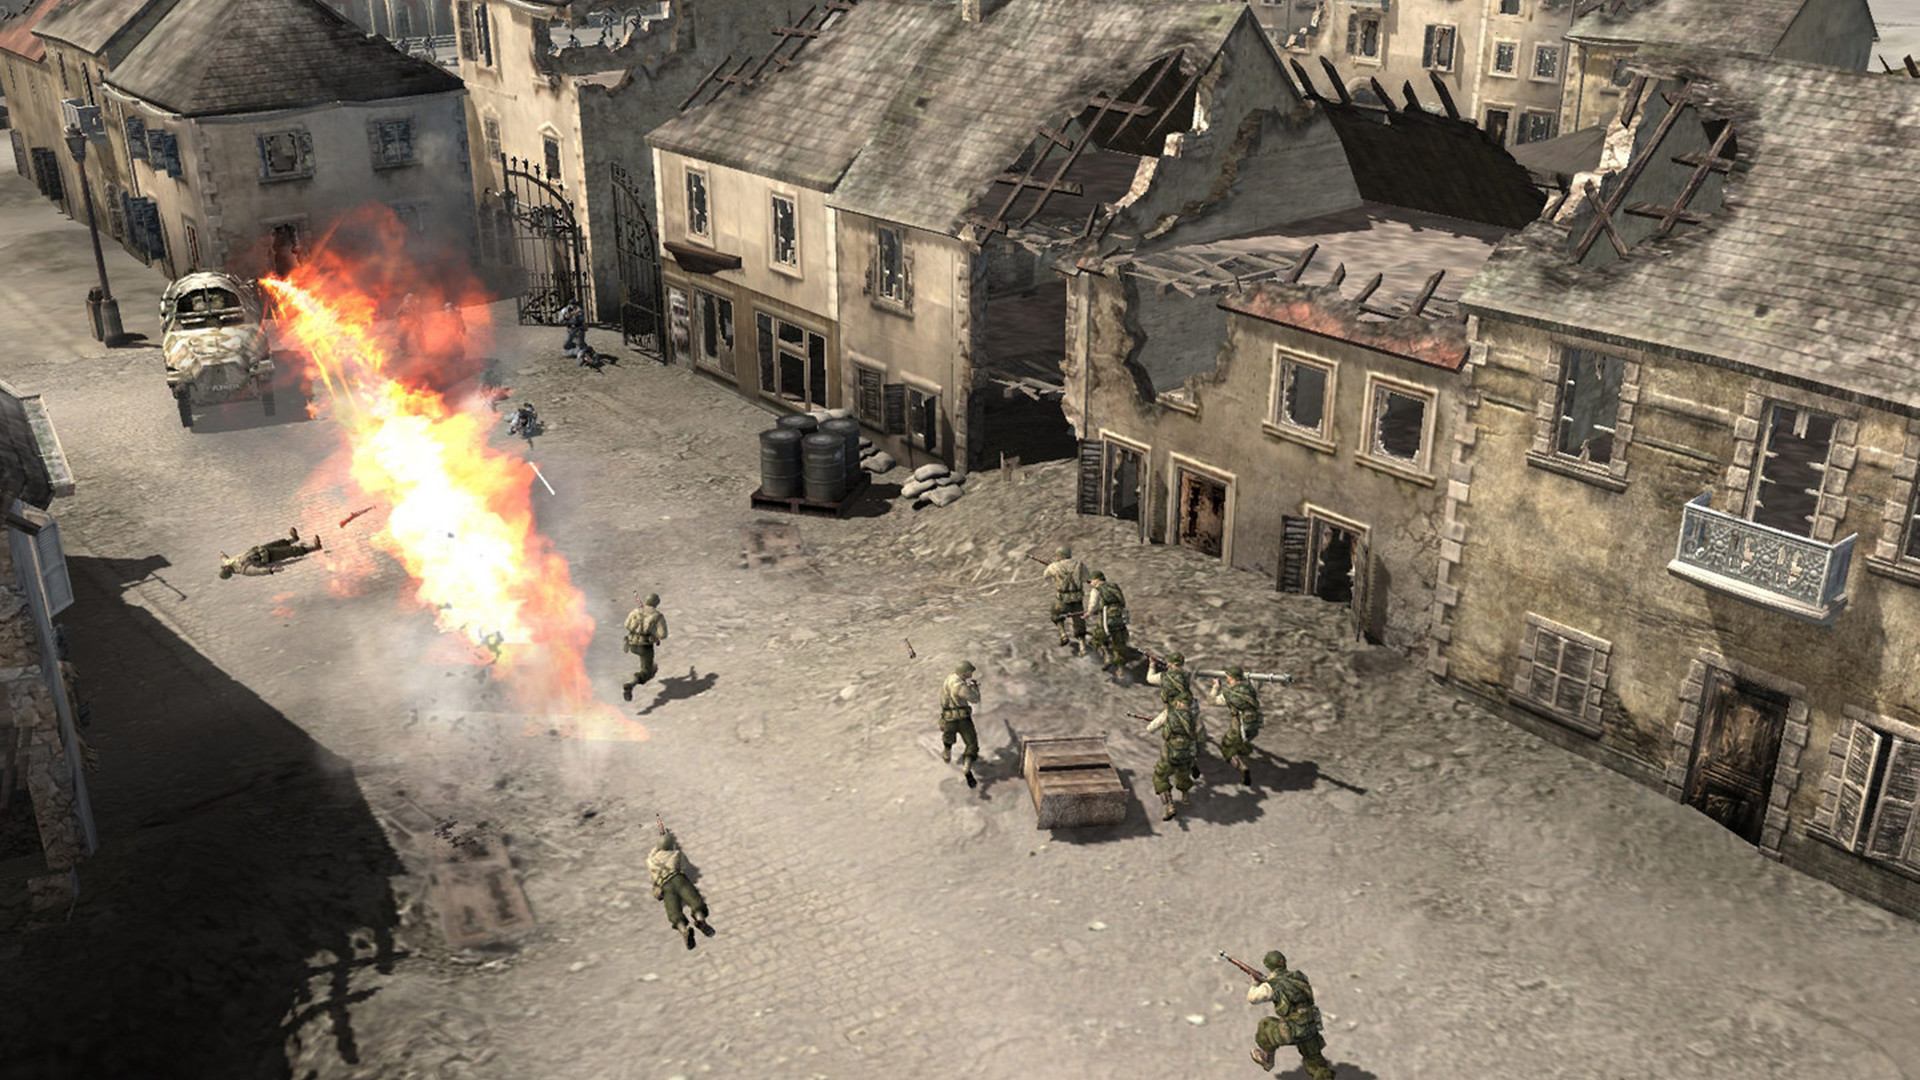 difference between company of heroes and company of heroes legacy edition